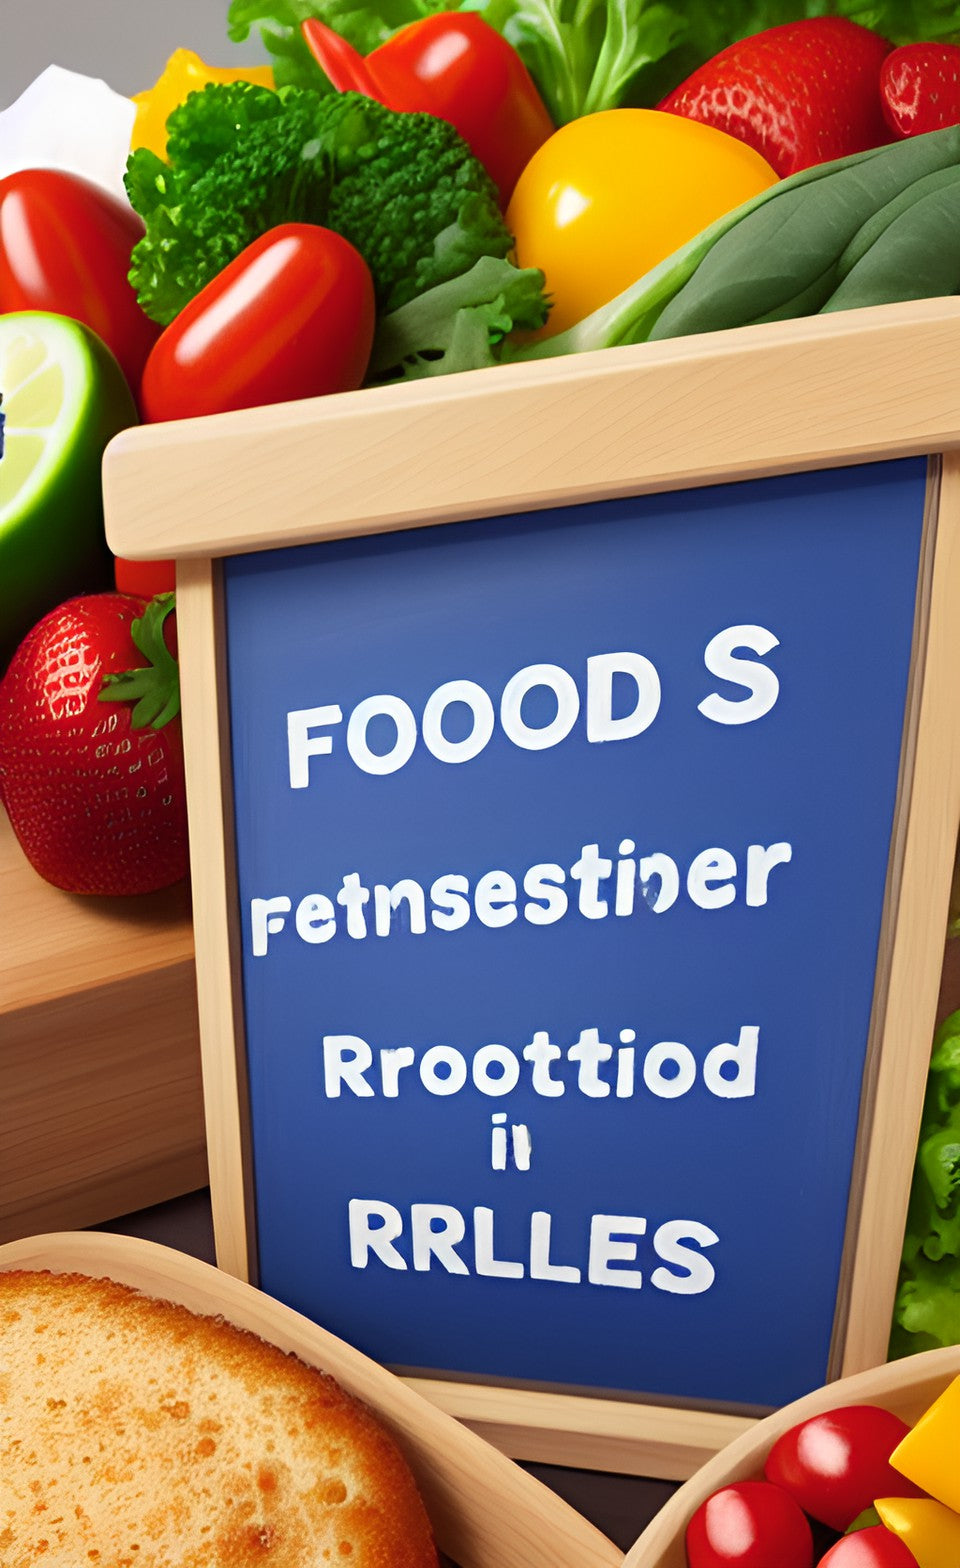 Food knows no boundaries and cuisine should not be restricted by rules and regulations.